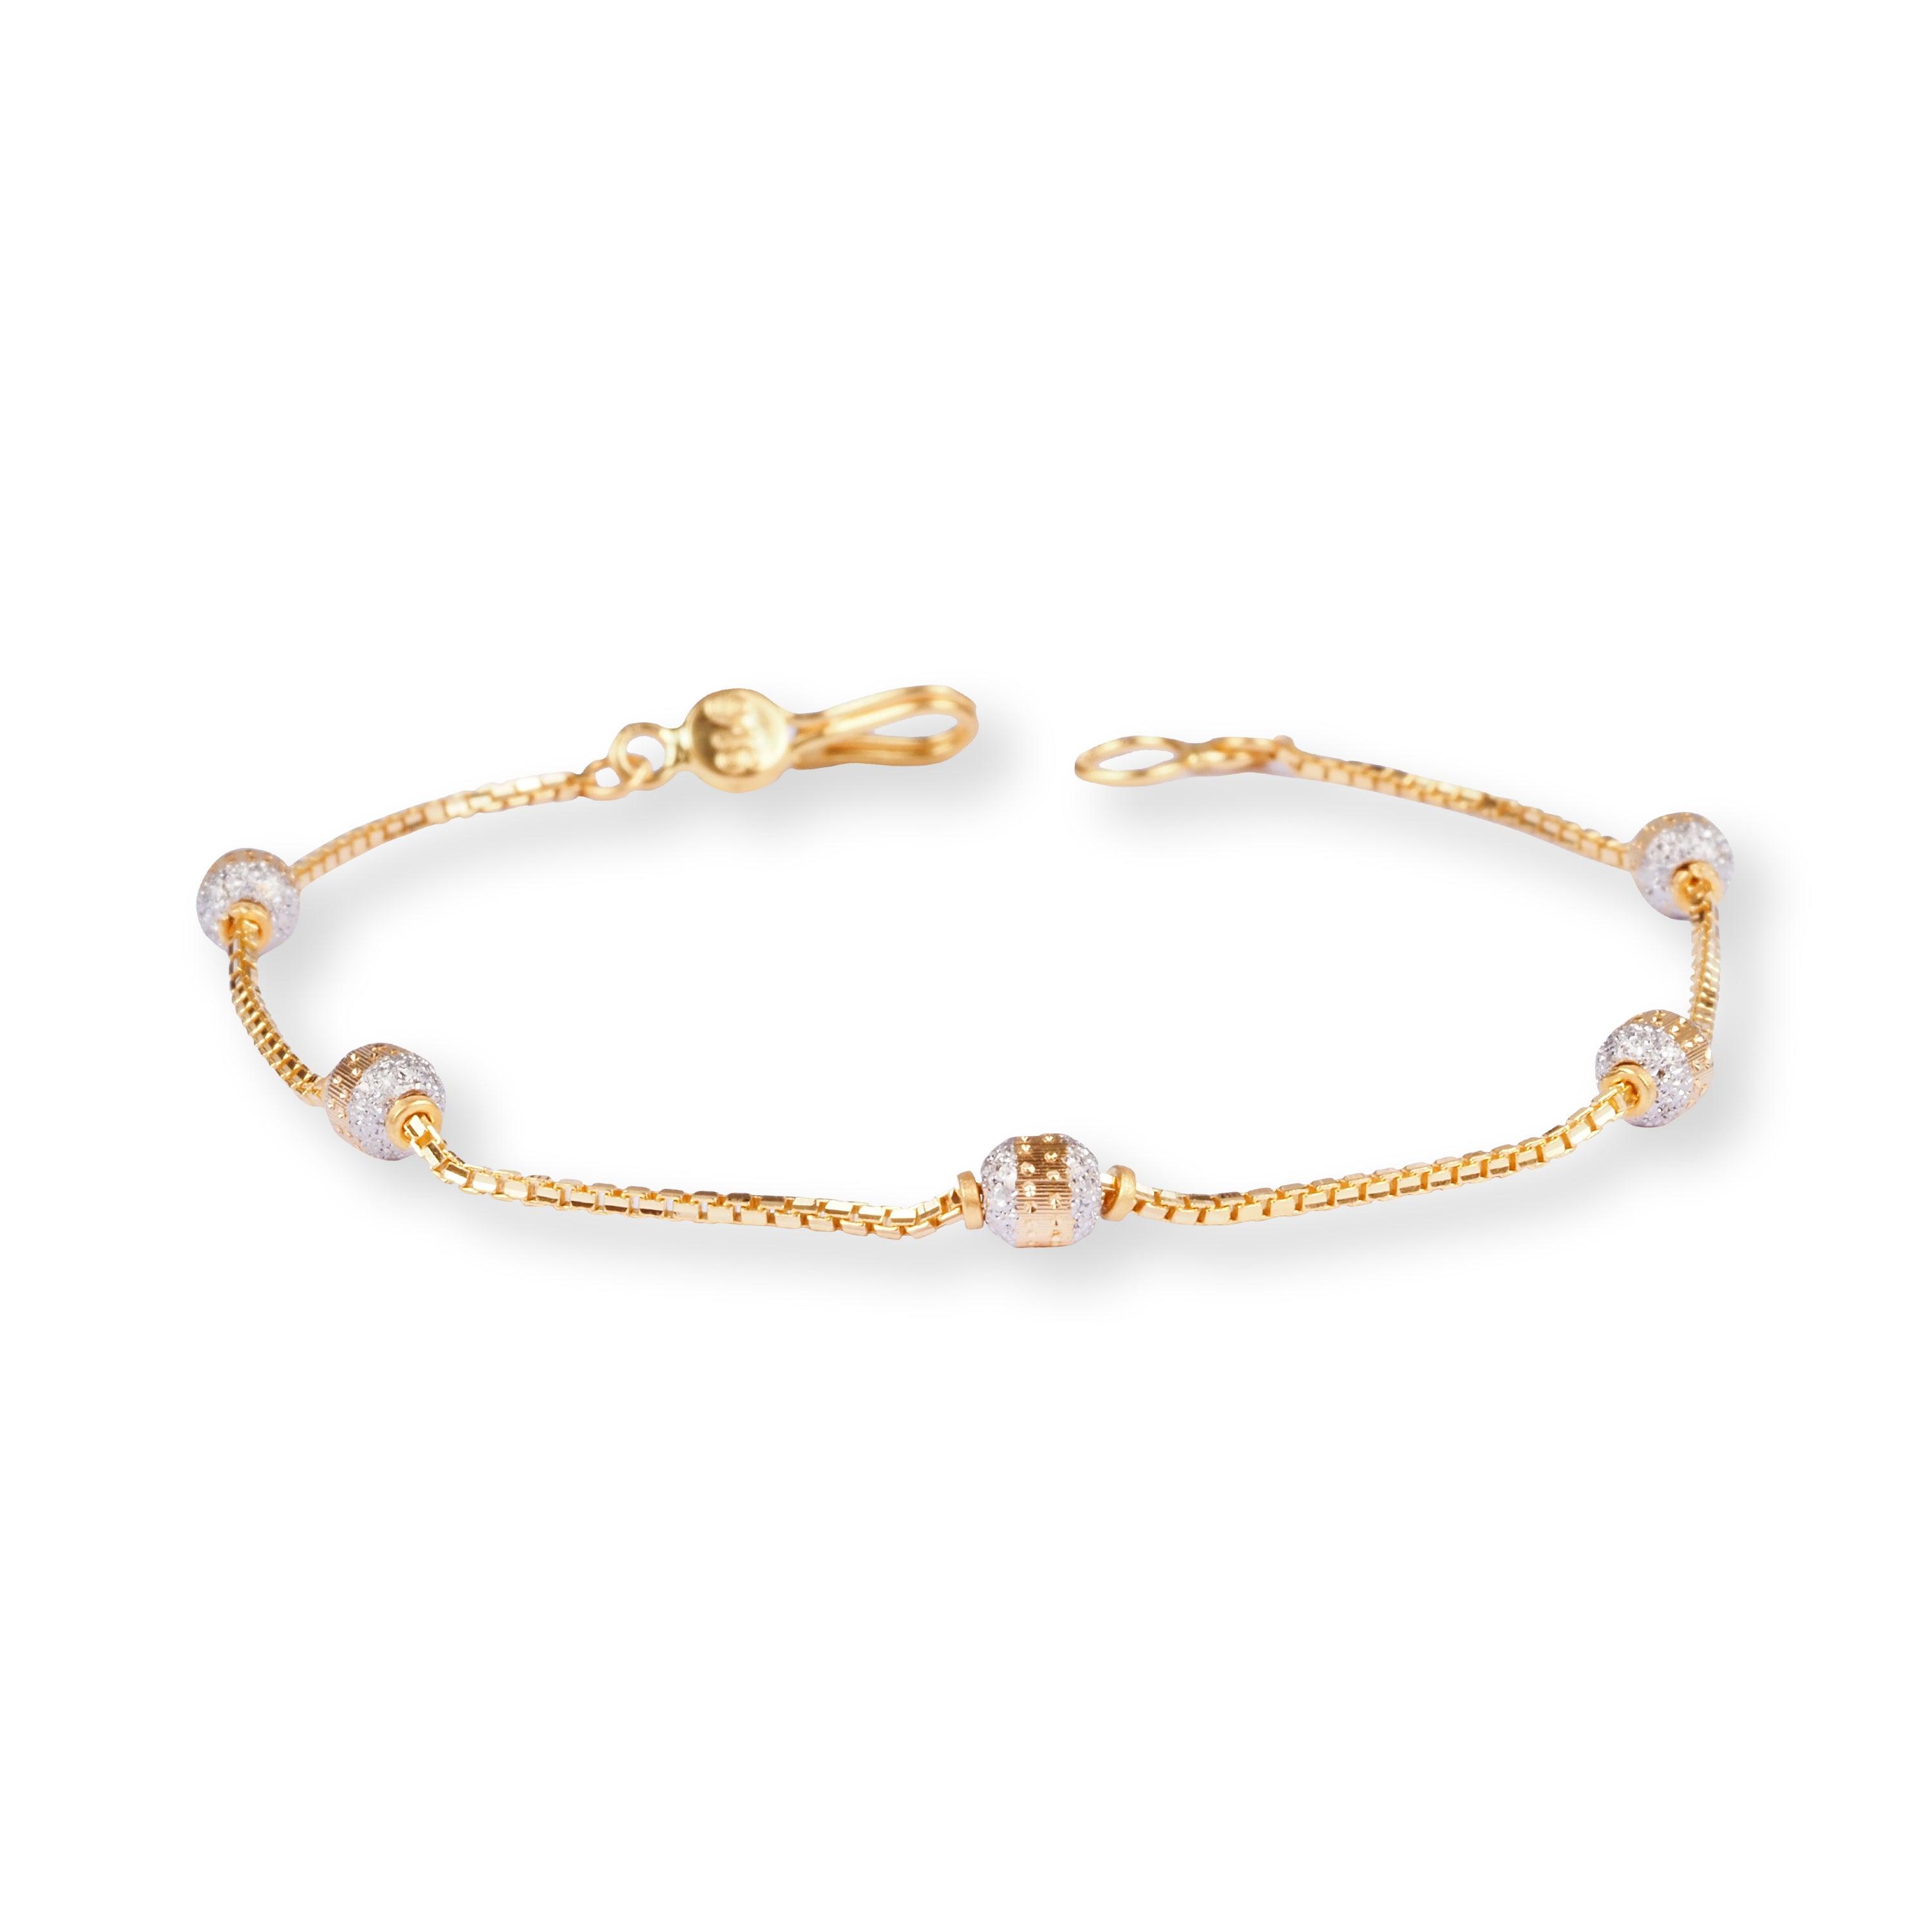 22ct Yellow Gold Bracelet with Diamond Cut Beads and Hook Clasp LBR-8495 - Minar Jewellers